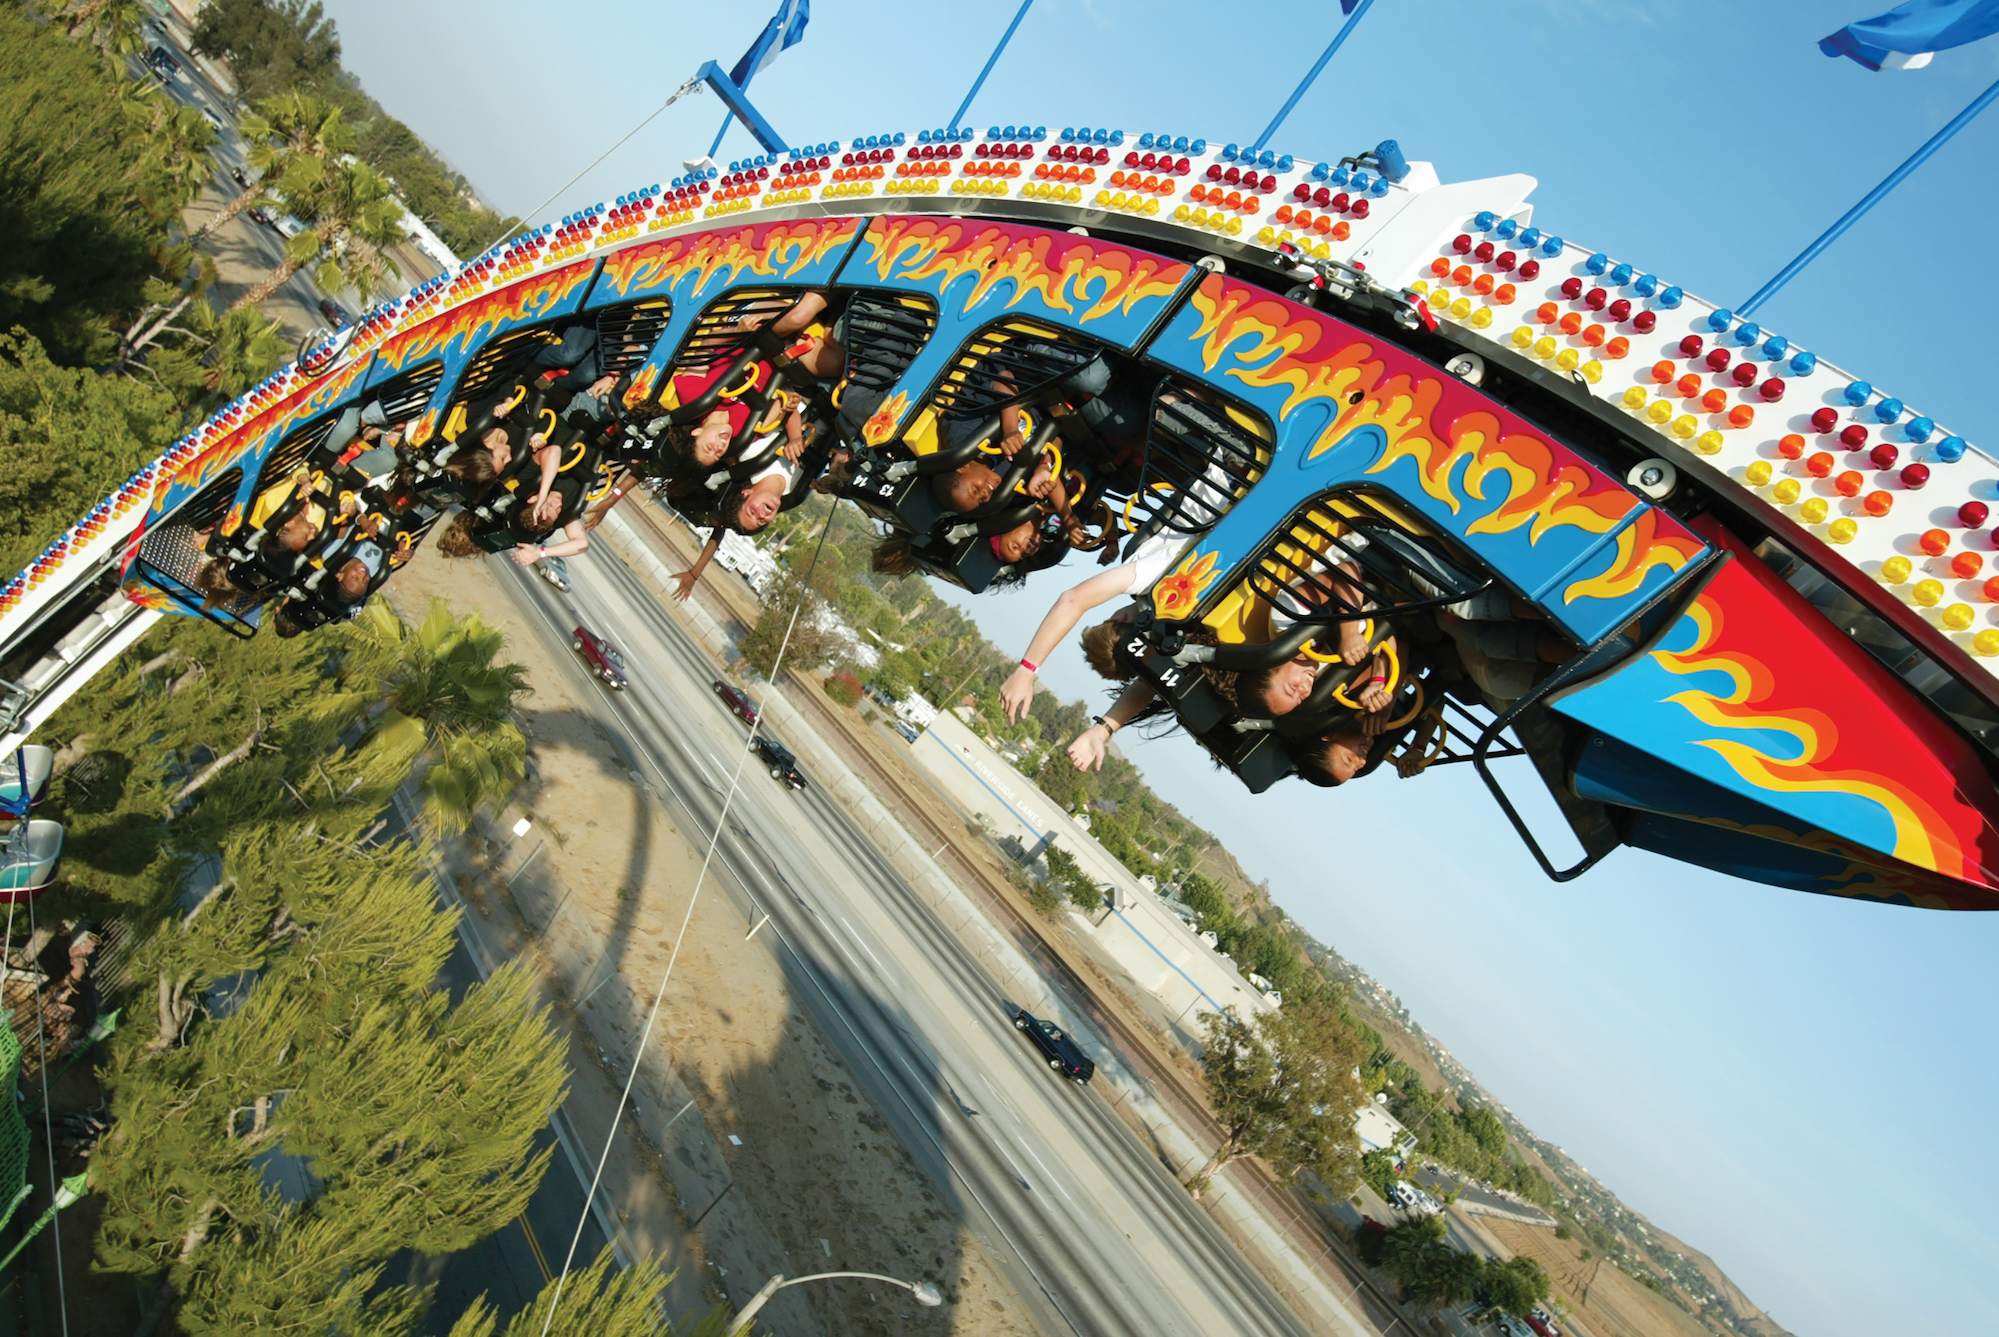 Visitors upside down on the FireBall roller coaster at Castle Park.